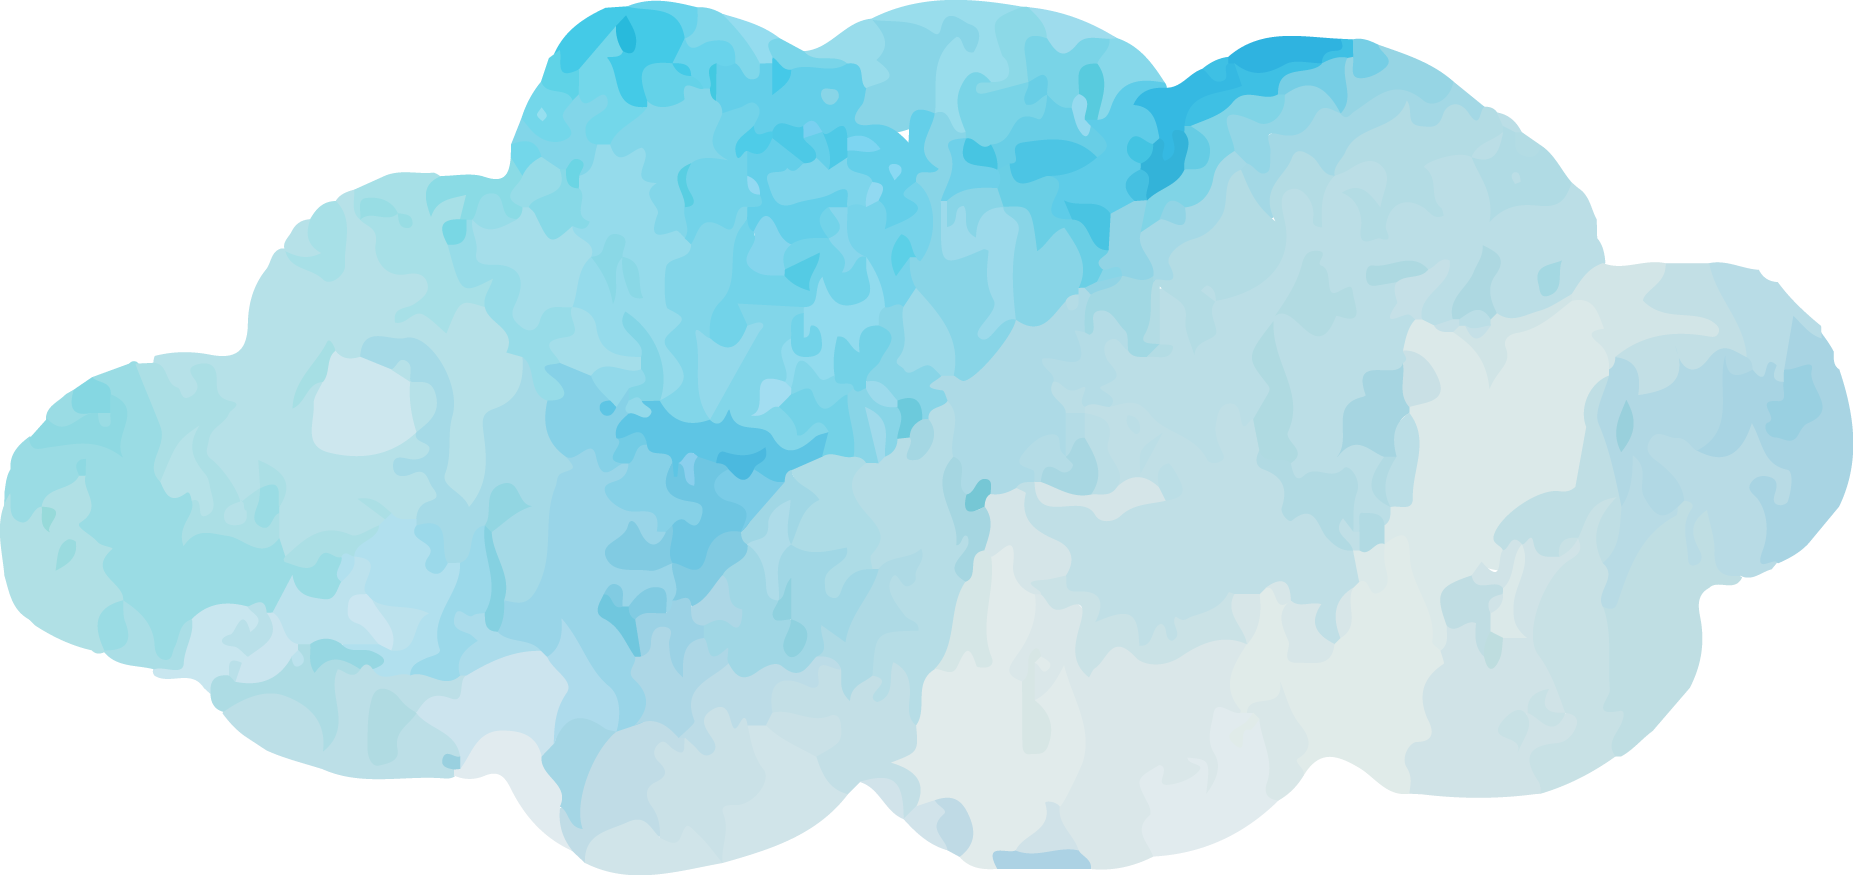 Blue Turquoise Clouds Sky Watercolor Vector Font Clipart